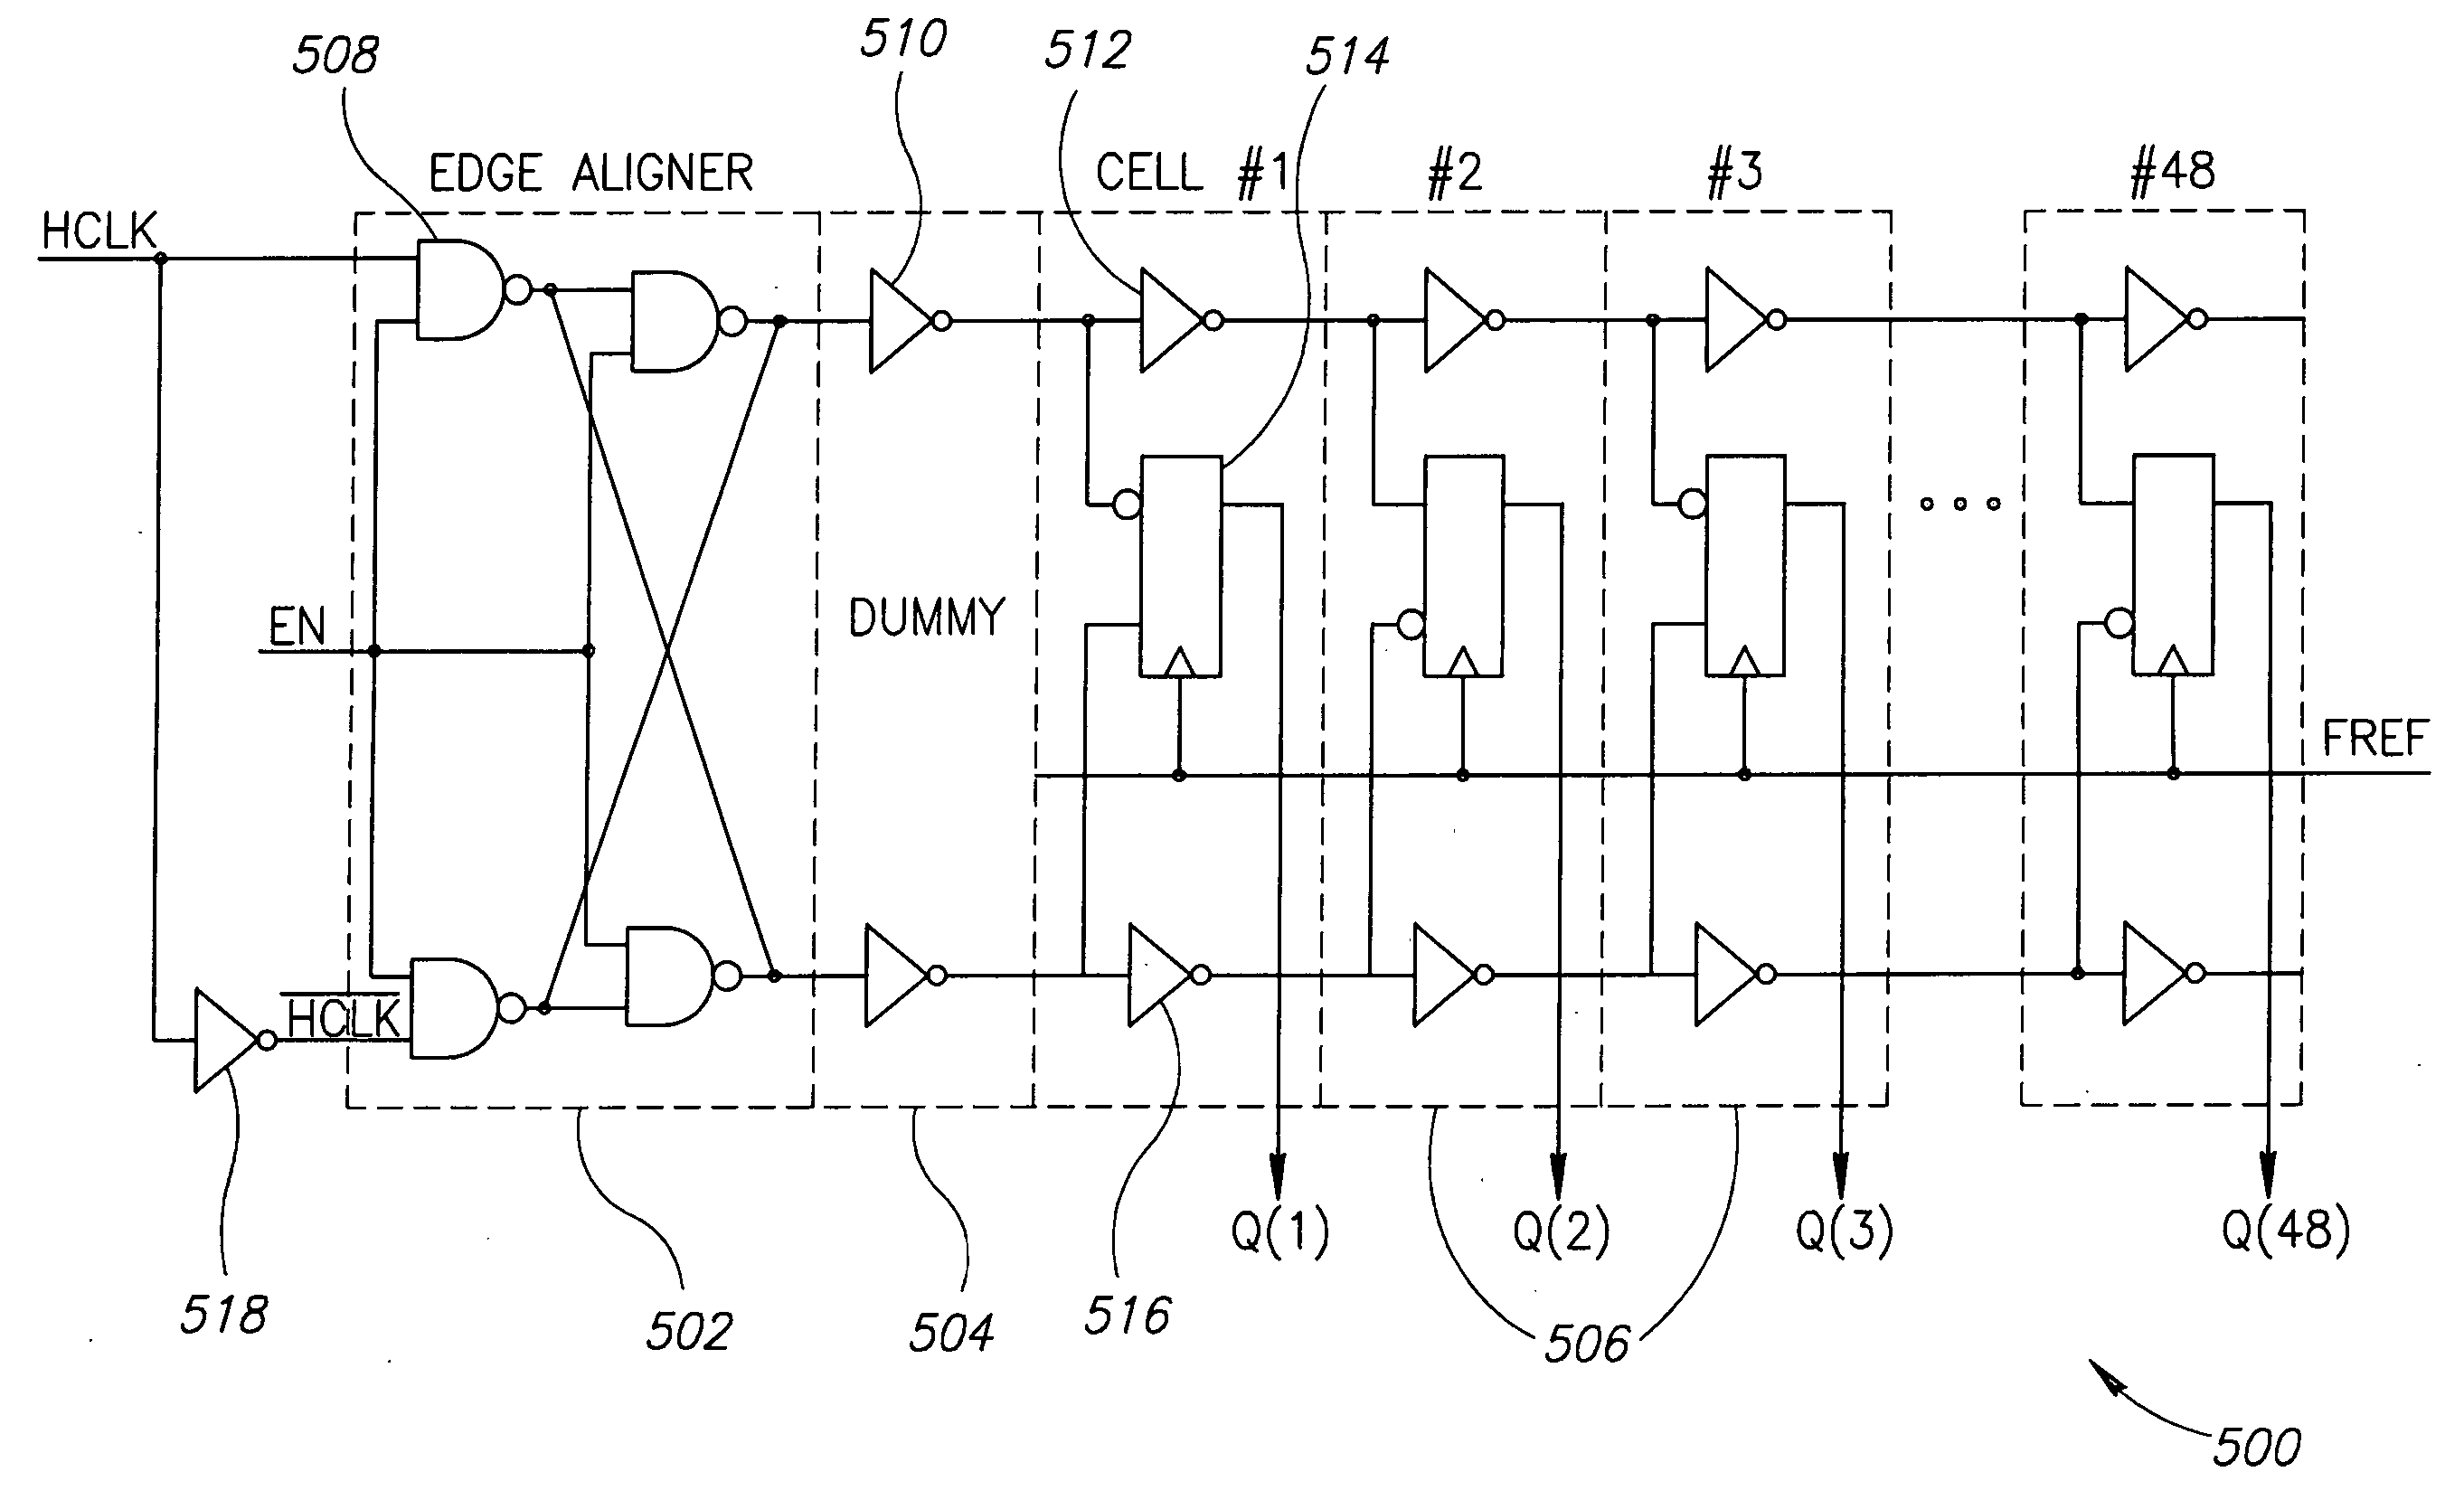 Circuit for high-resolution phase detection in a digital RF processor